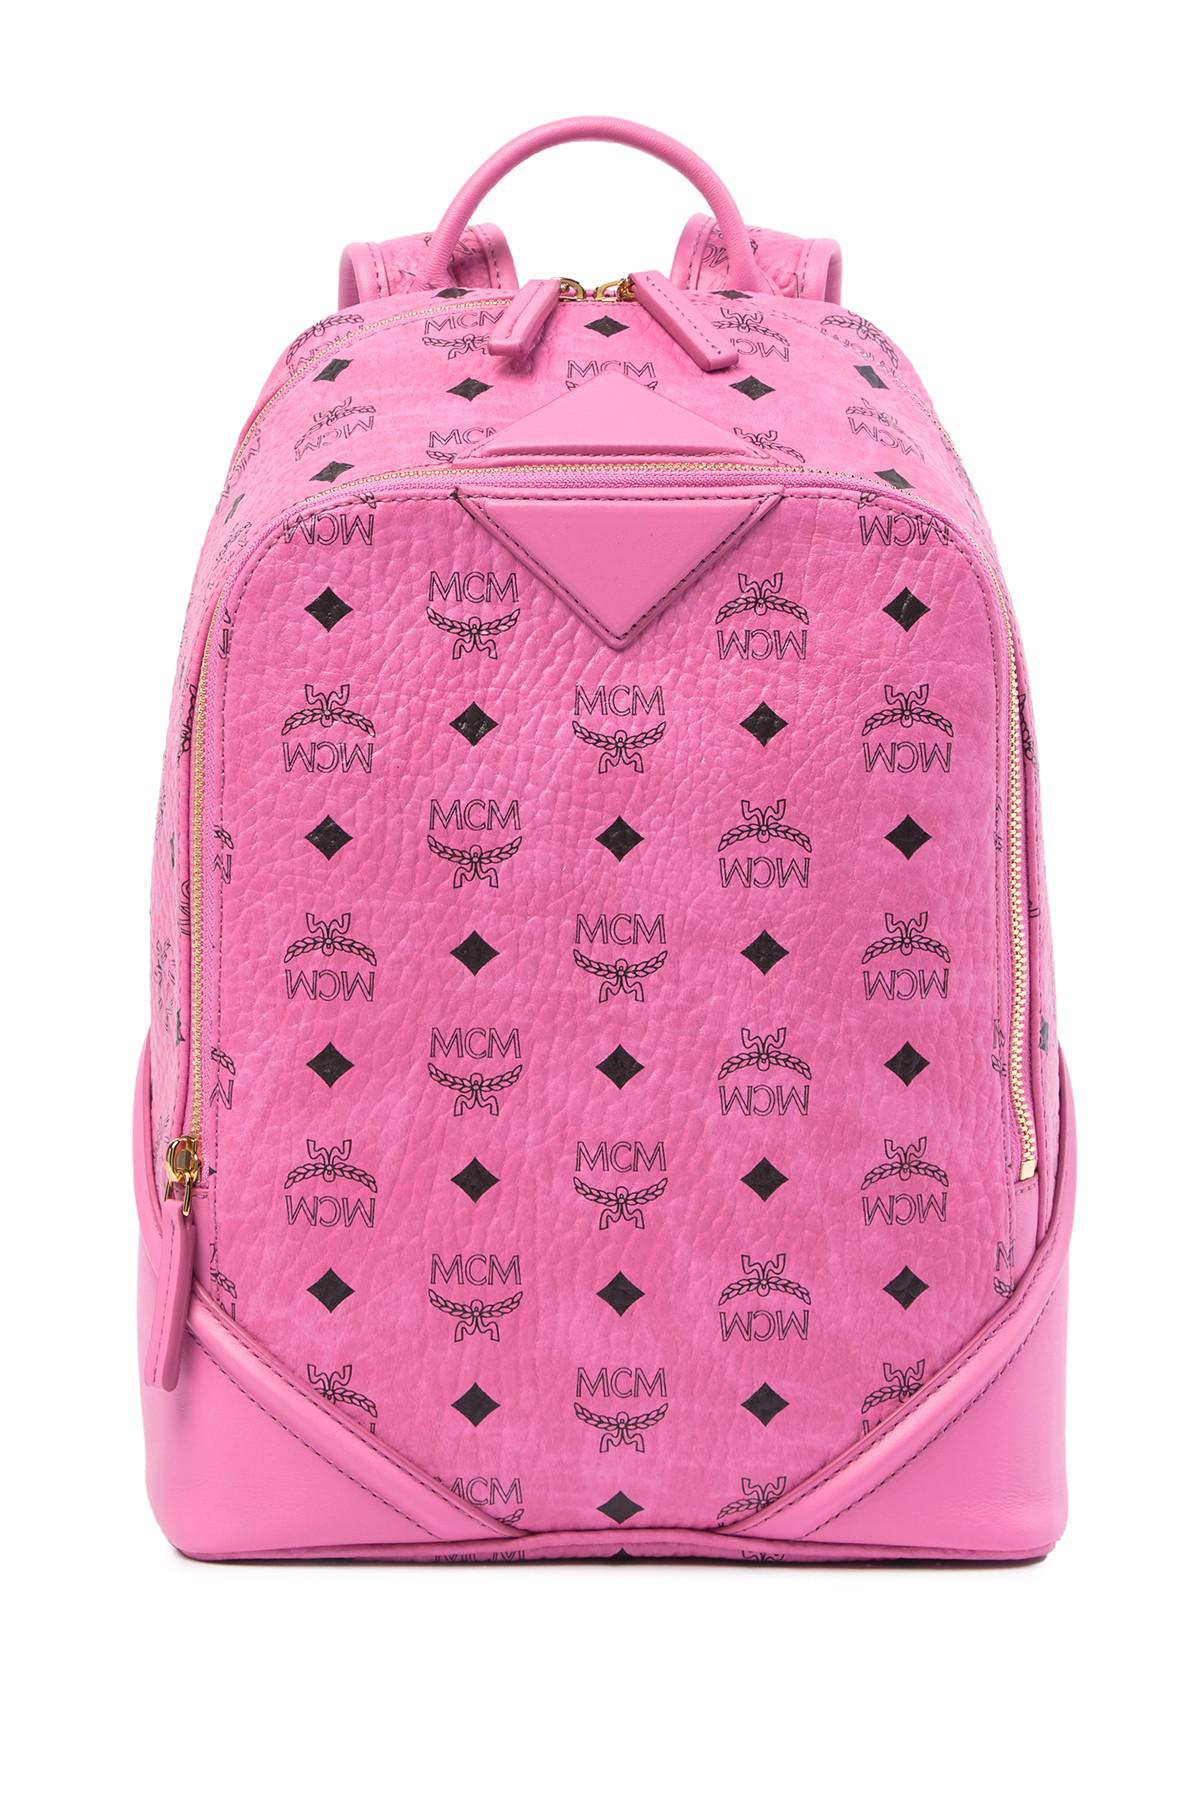 MCM Mini Pink Leather Backpack | Lyst